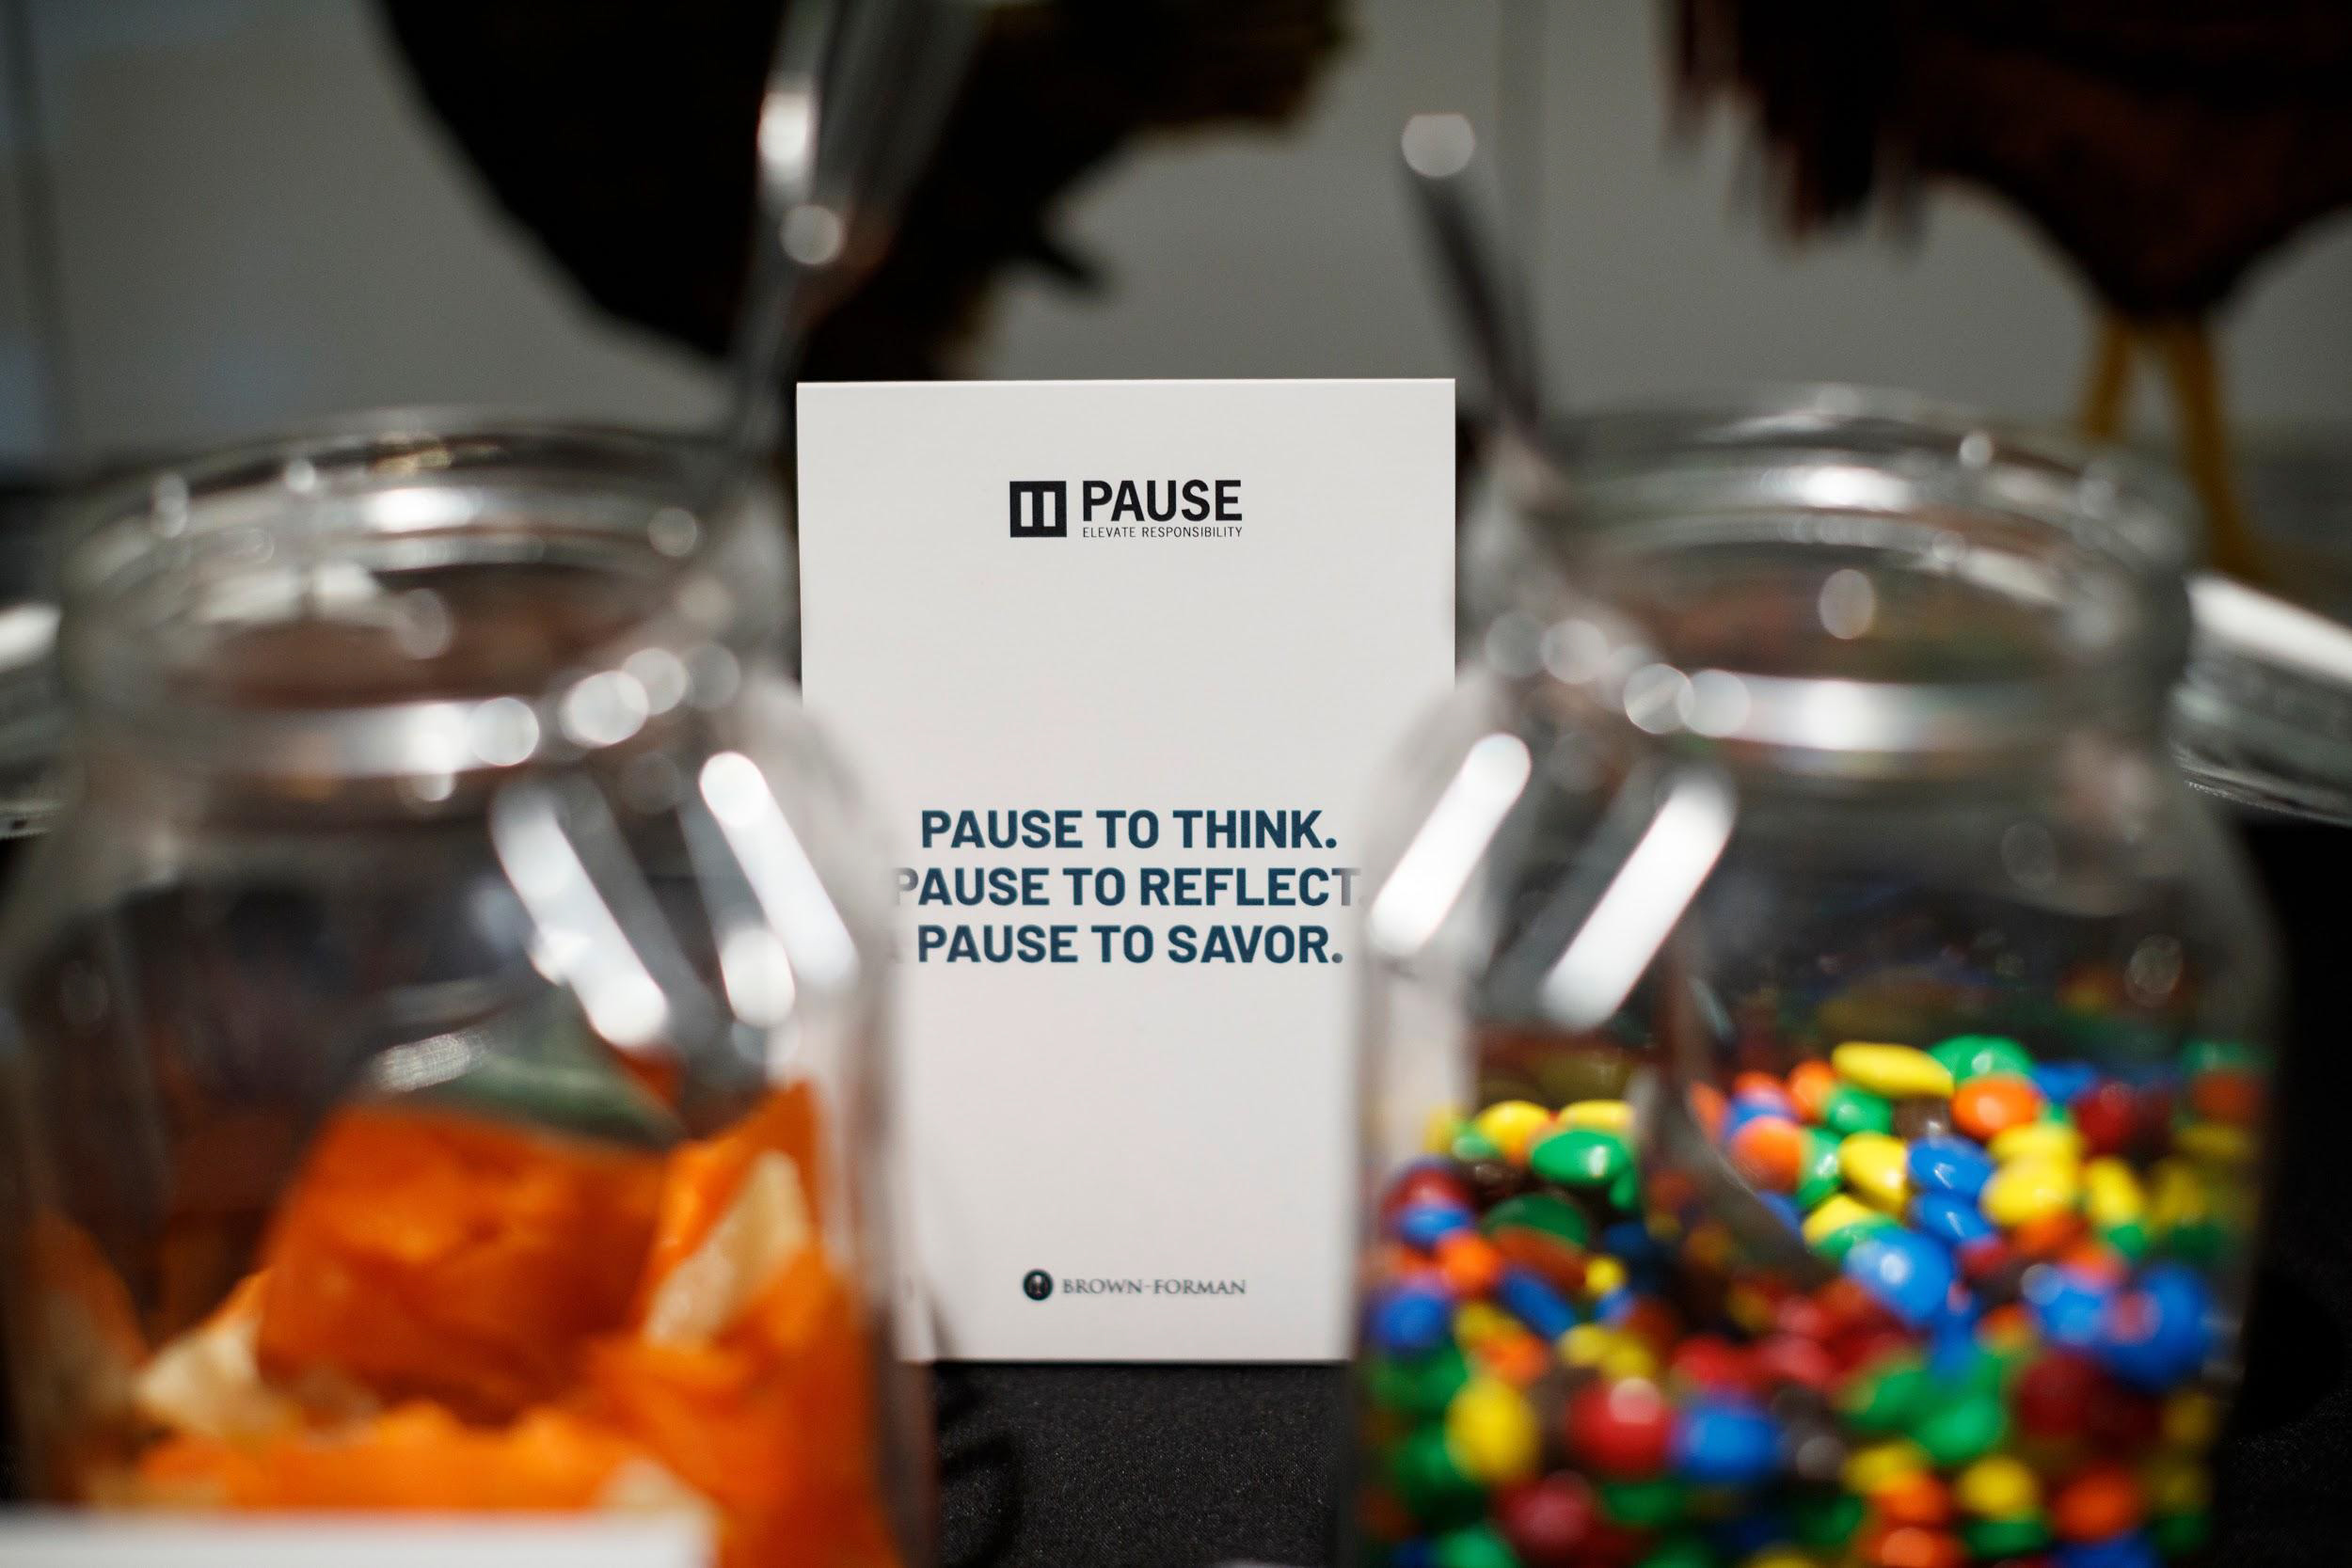 PAUSE events